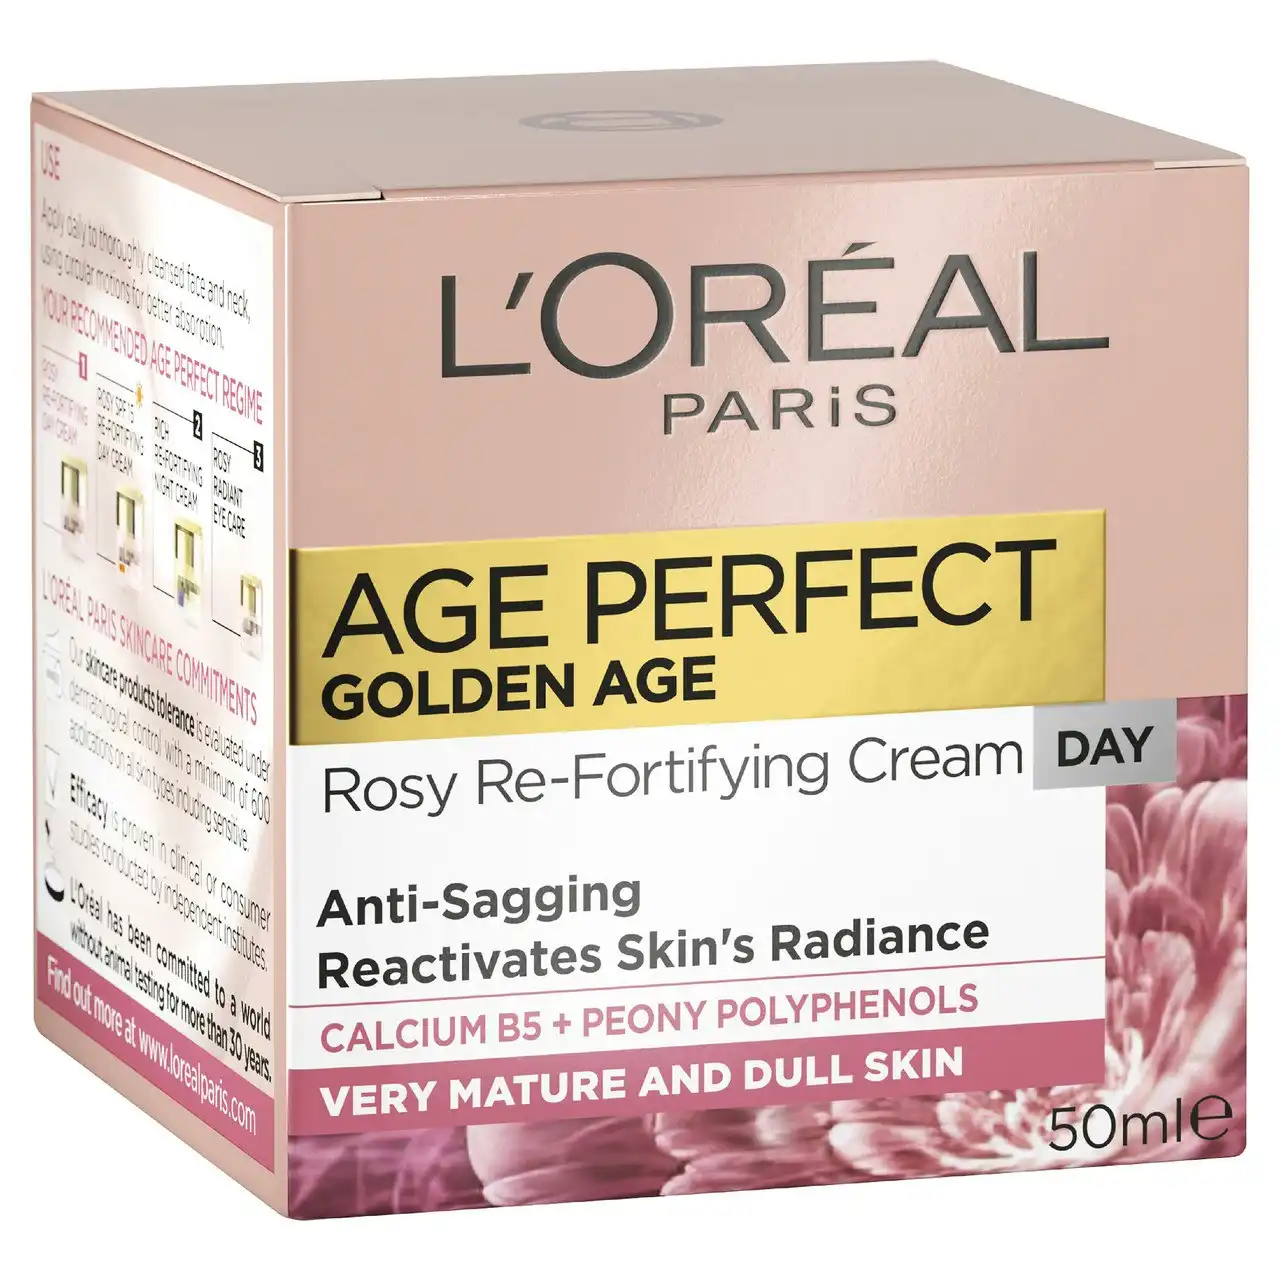 L'Oreal Paris Golden Age Rosy Re-Densifying Day Cream